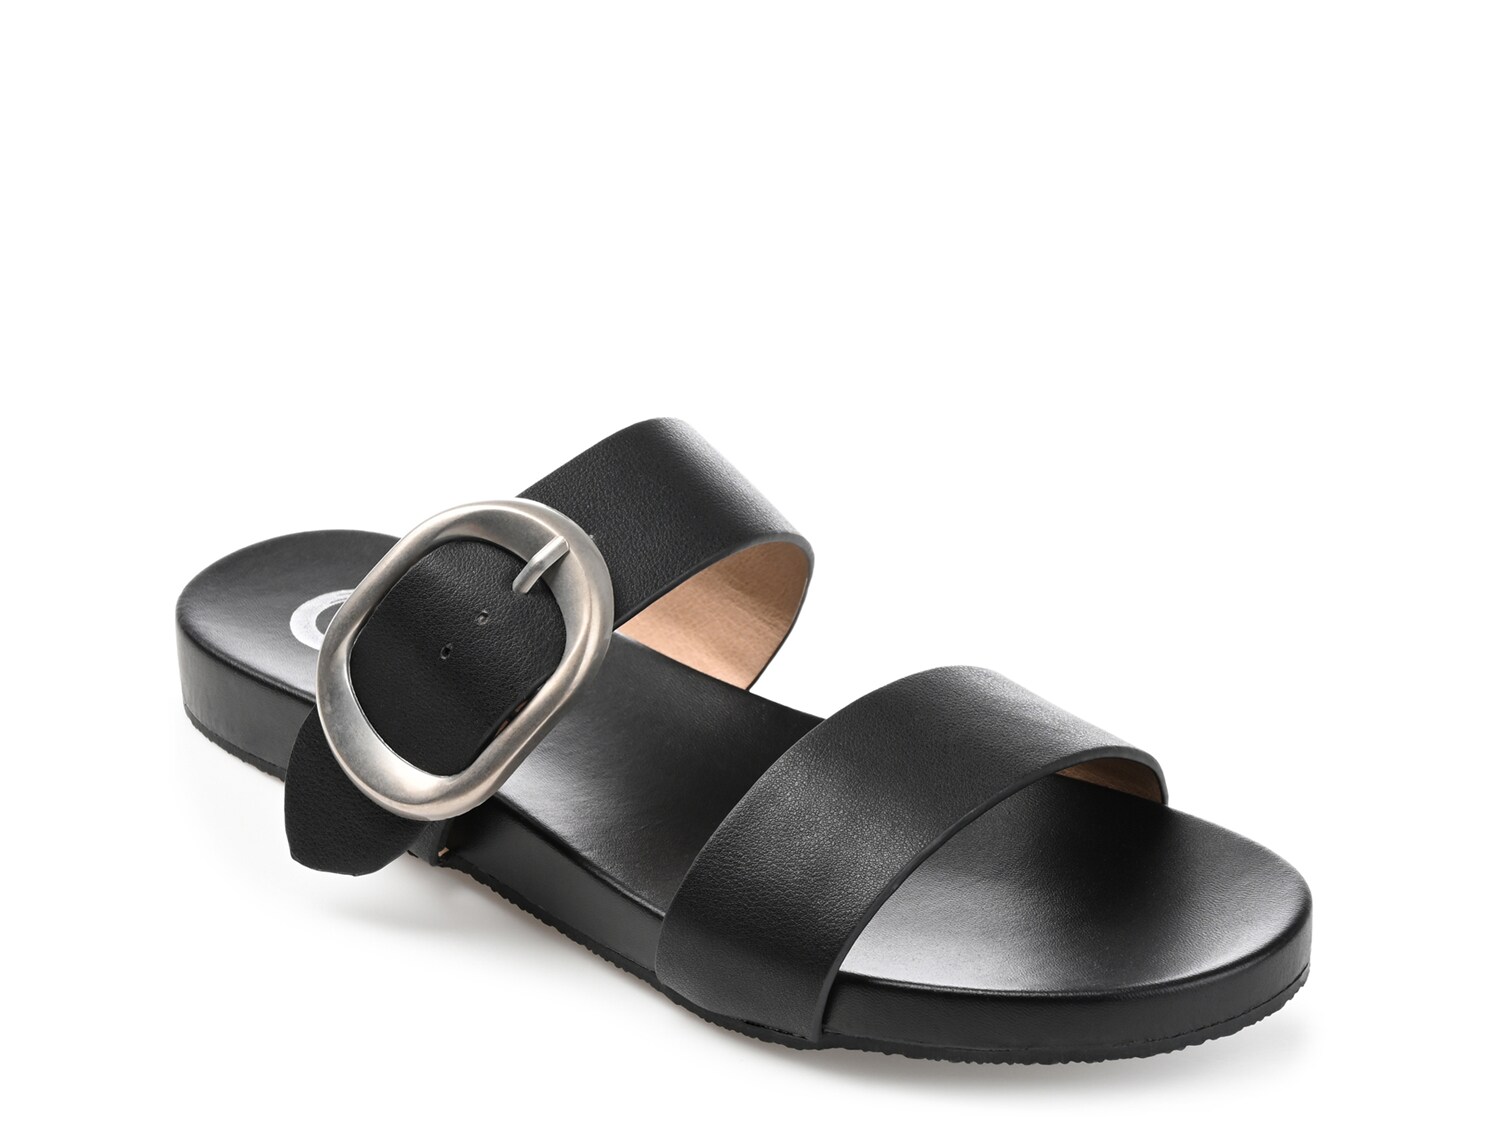 Journee Collection Crysta Sandal - Free Shipping | DSW